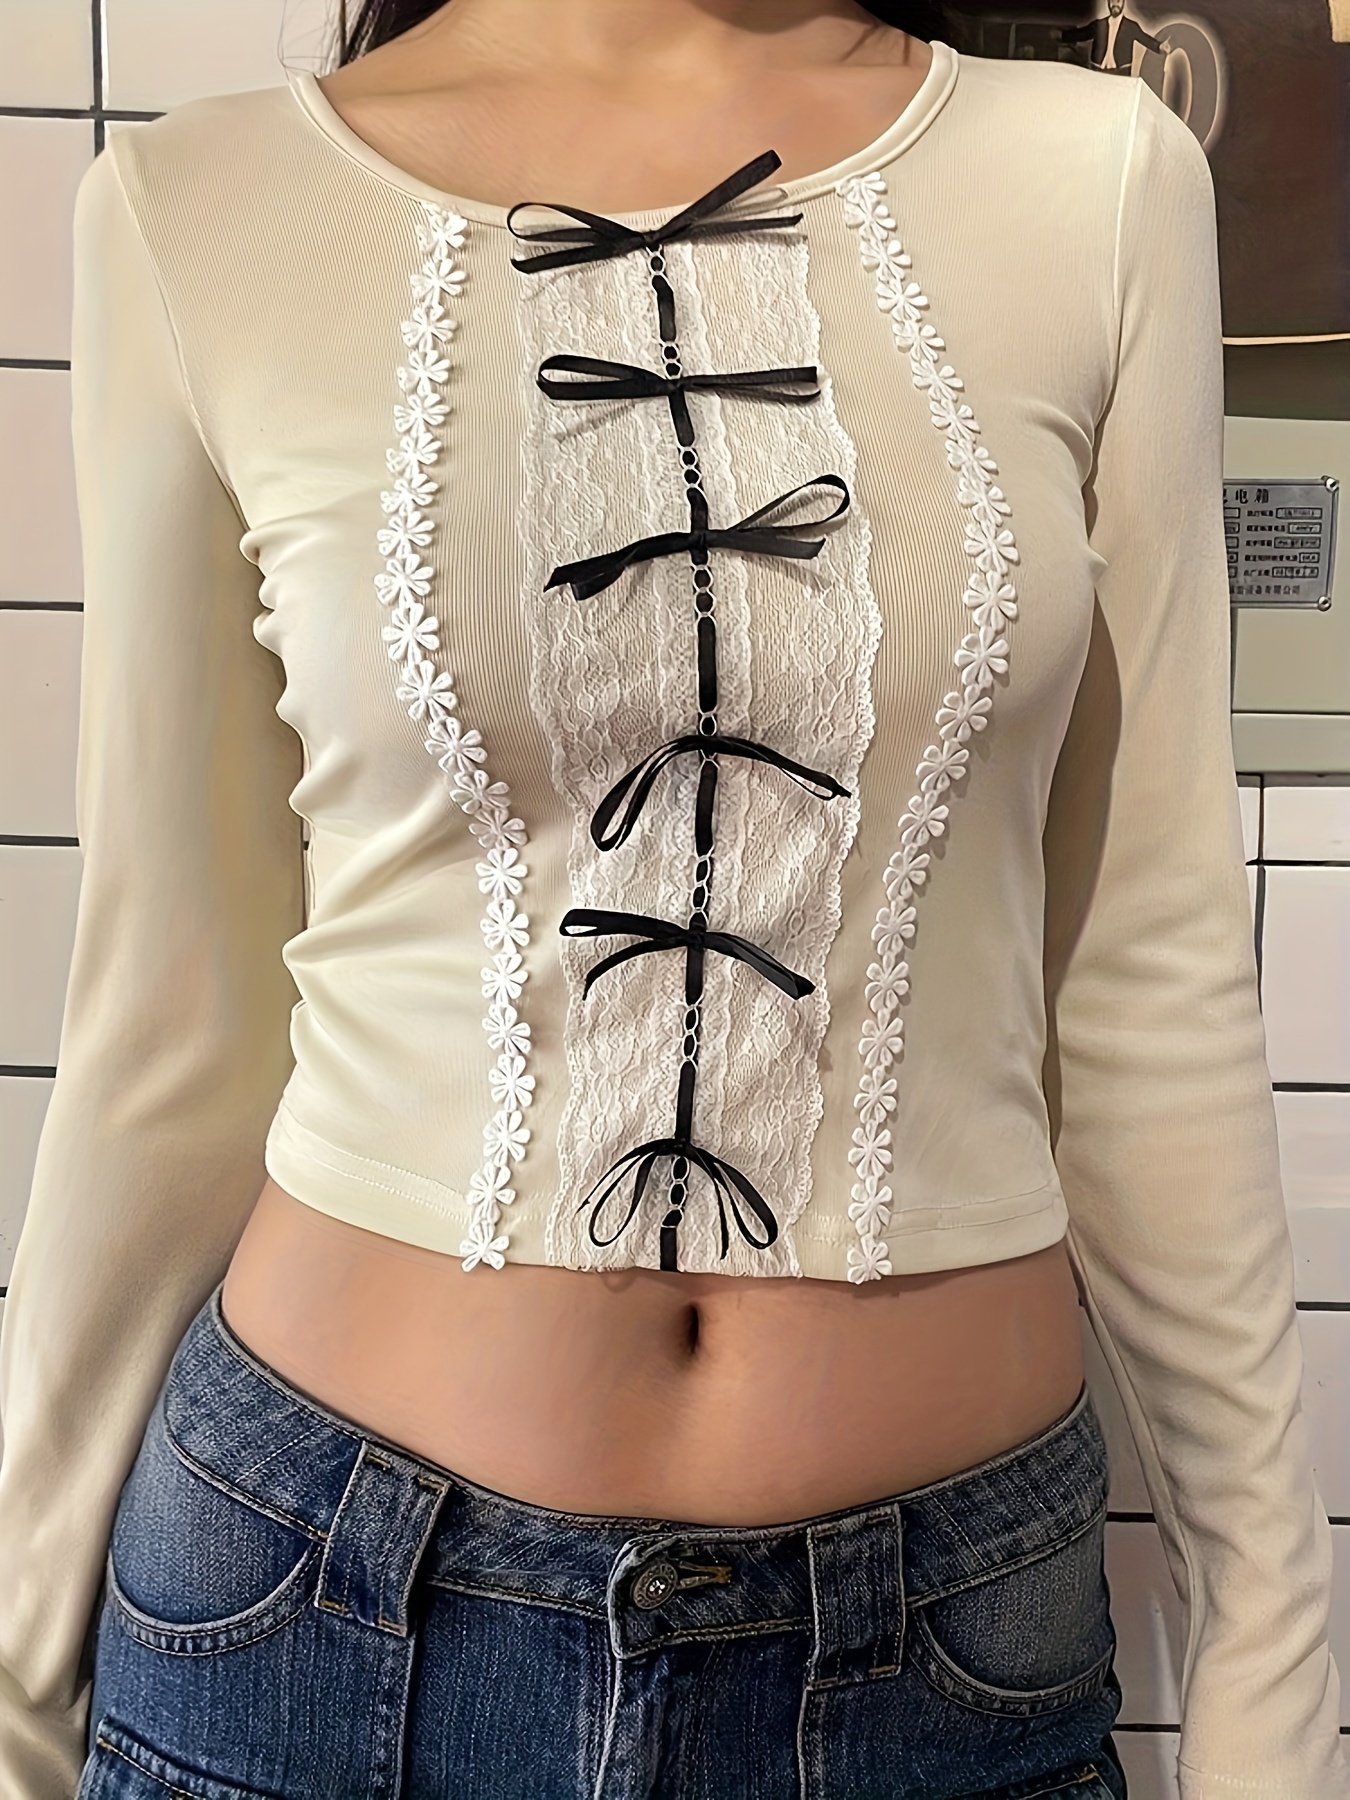 Bow & Flower Decor Crop Top, Y2K Long Sleeve Crew Neck Top For Spring &  Fall, Women's Clothing For Cute/Coquette Style